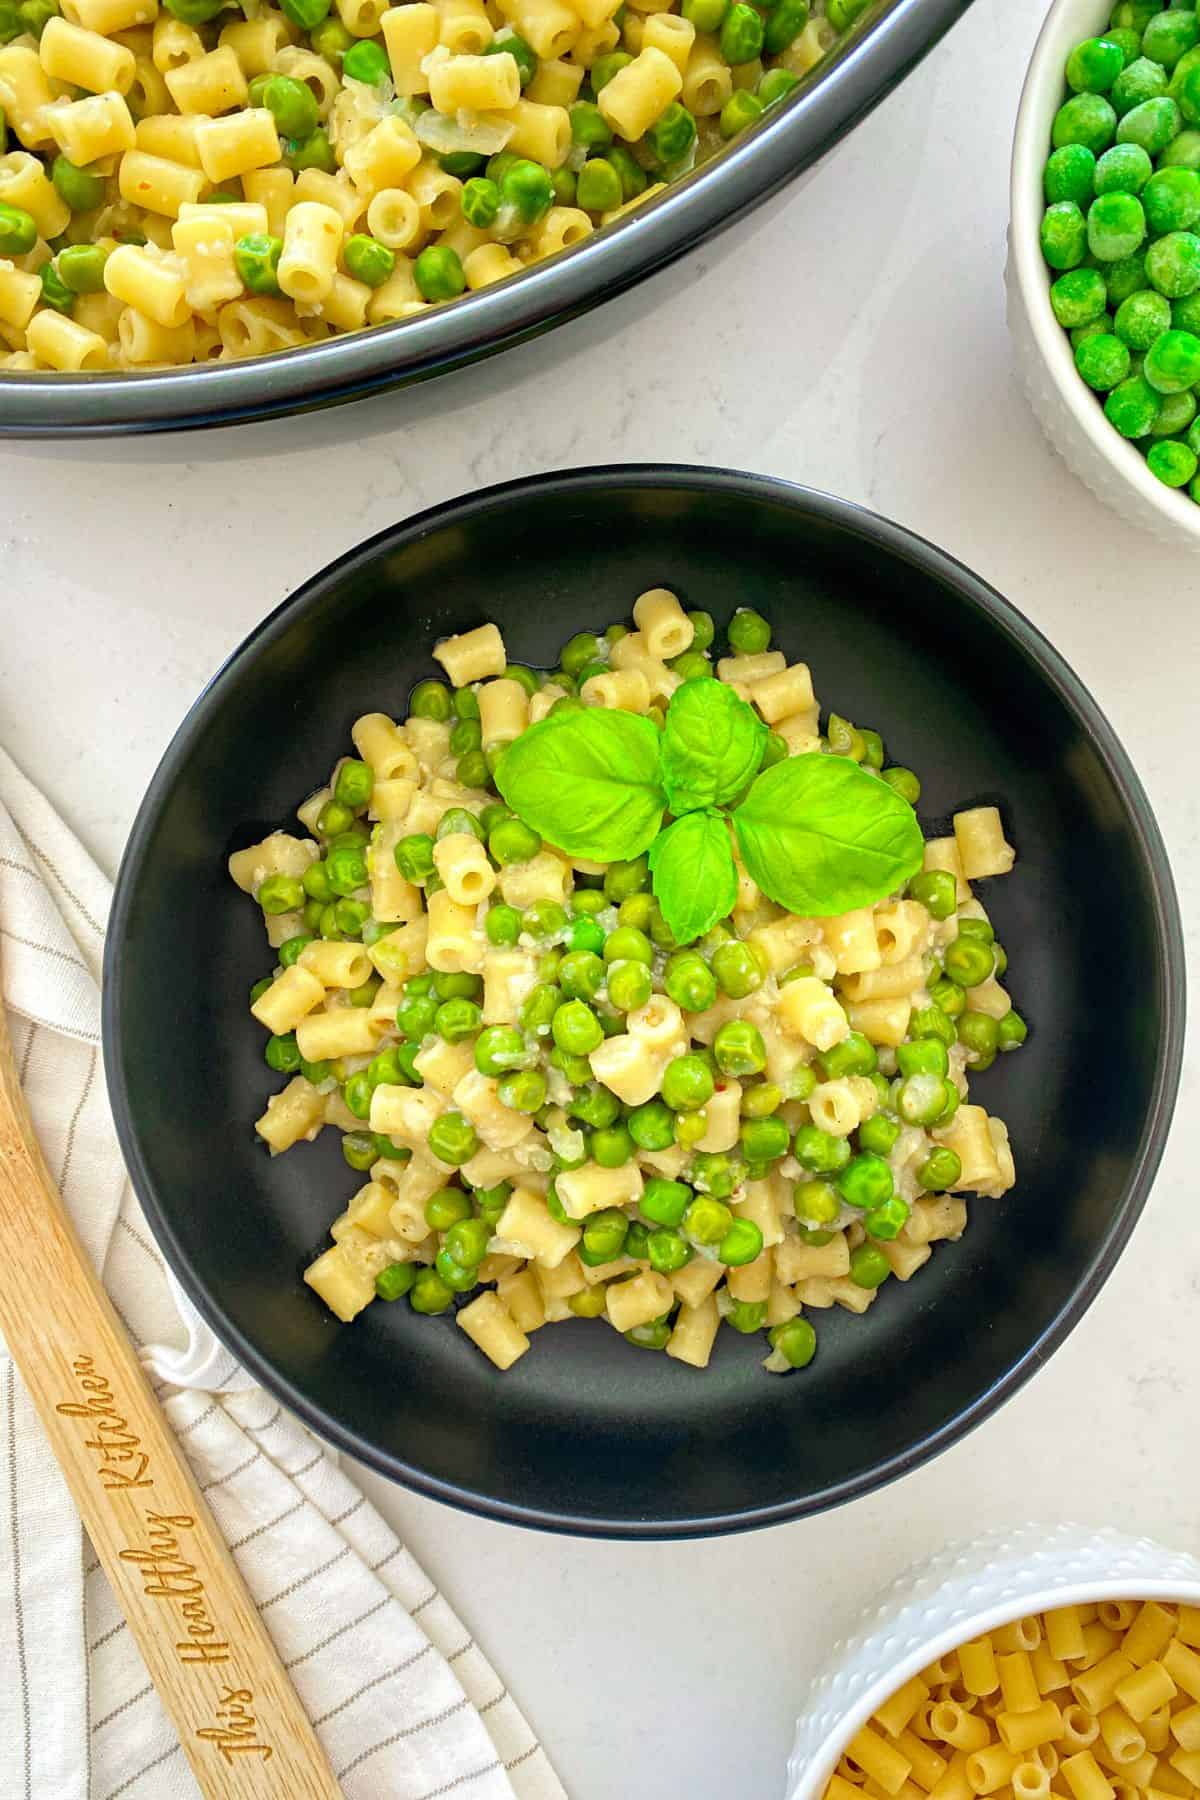 Black bowl with pasta and peas inside with basil leaf garnish.